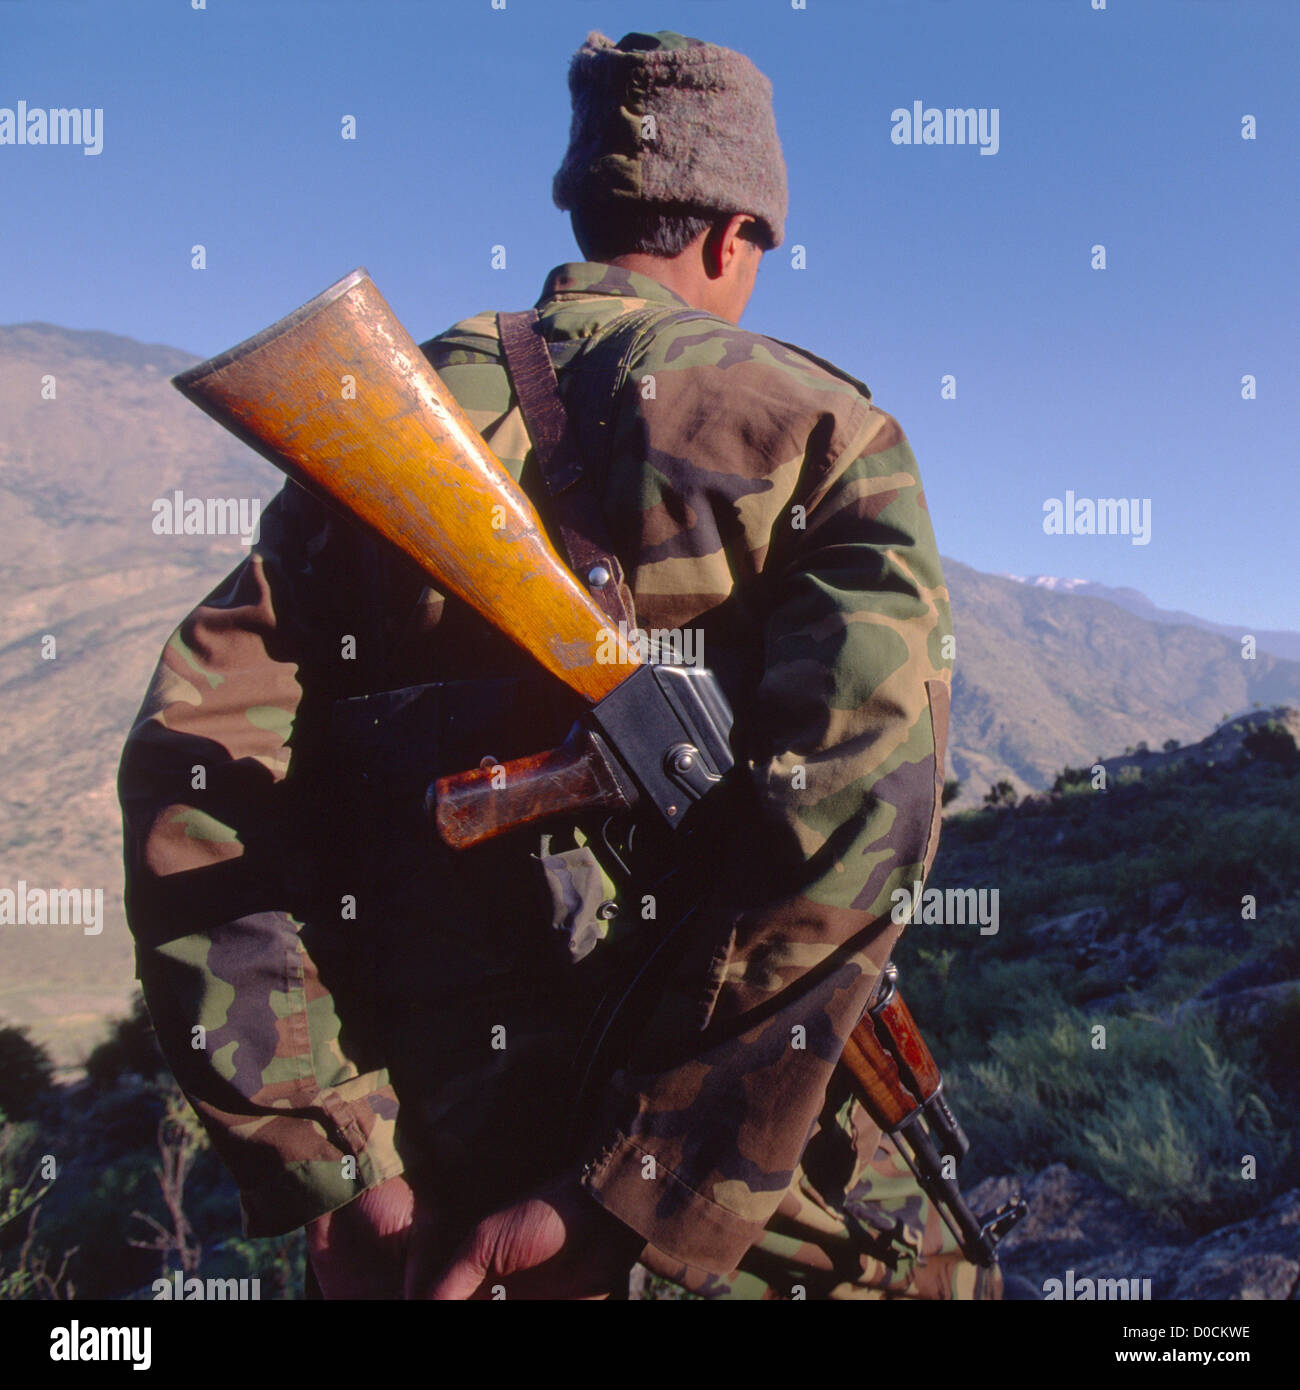 An Afghan National Army Soldier Scans Mountains During Raid on Suspected Al Qaeda Training Camp in Foothills Afghanistan's Stock Photo